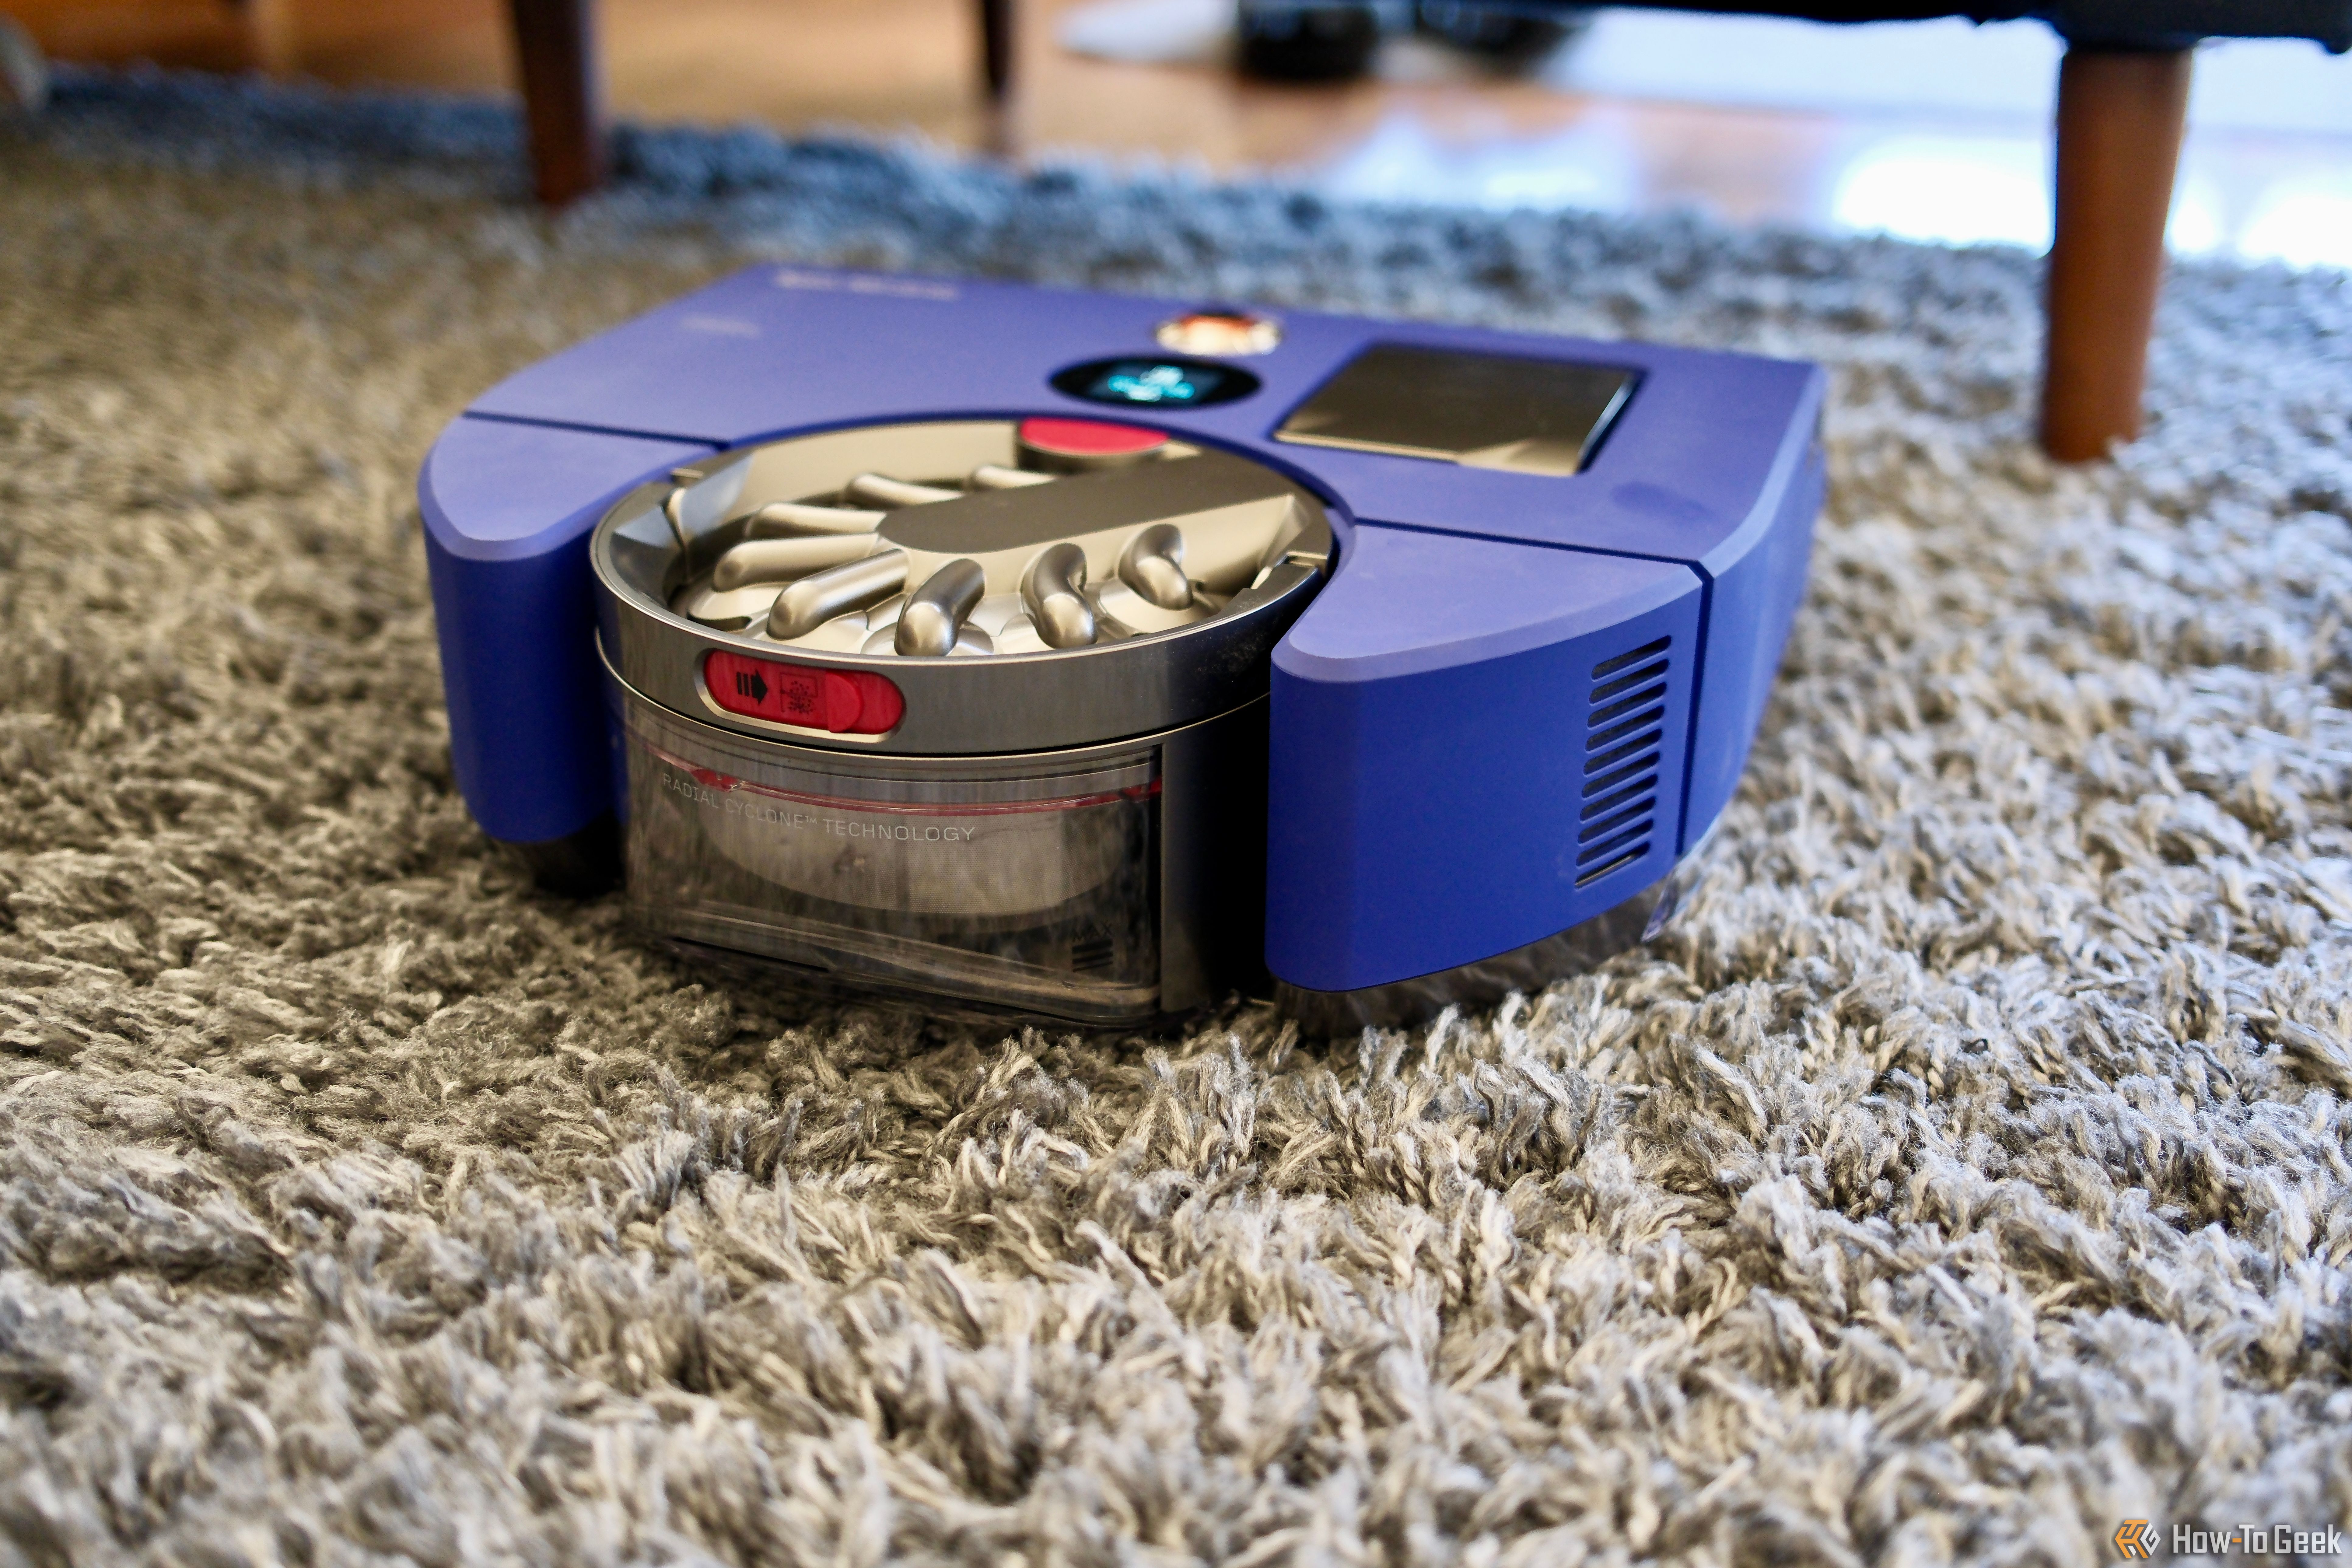 rear view of the Dyson 360 Vis Nav on carpet